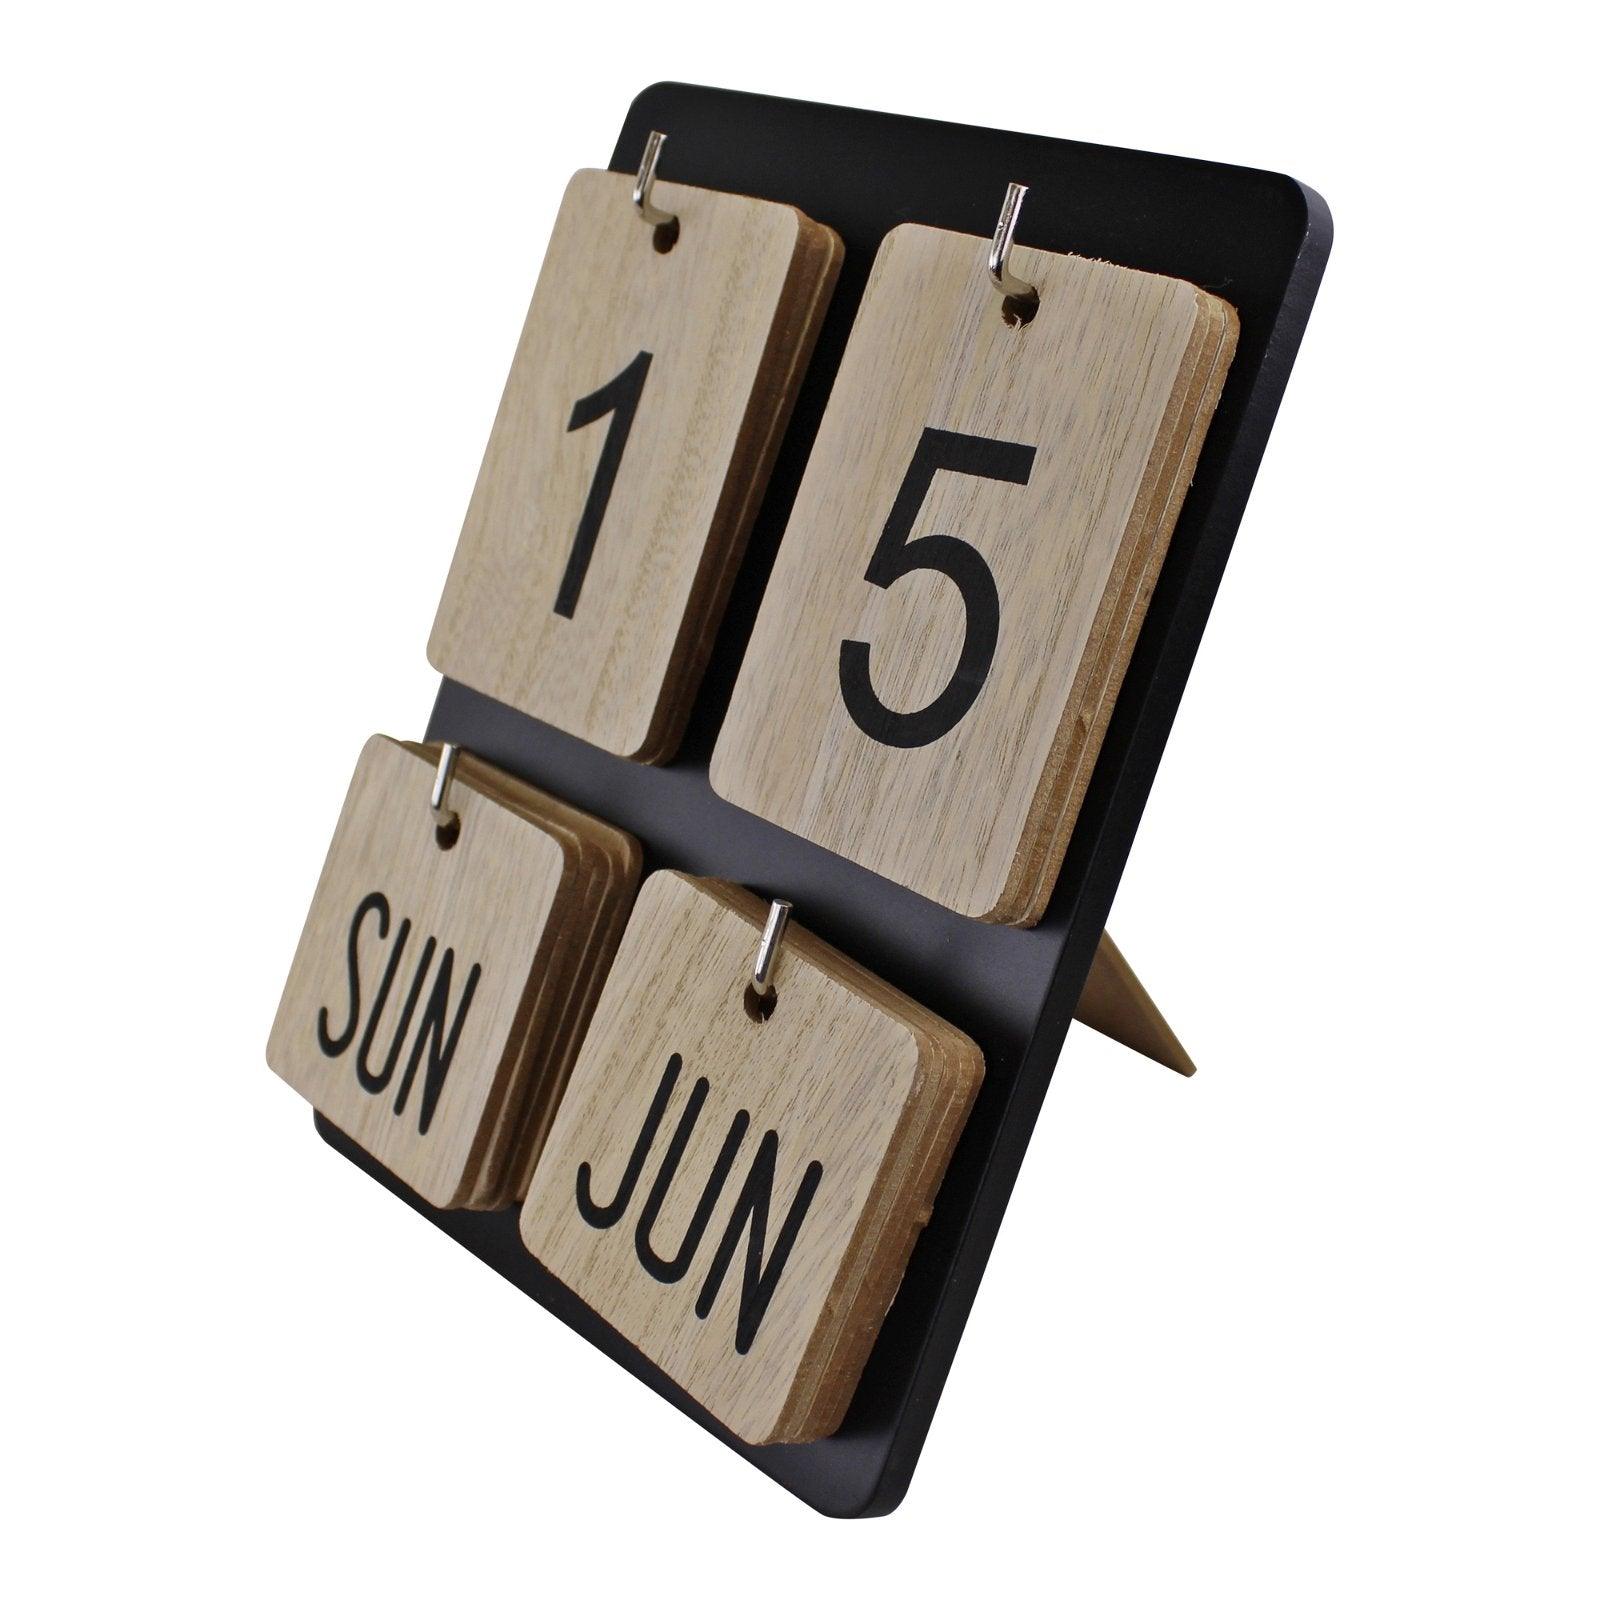 View Wooden Freestanding Photo Frame Style Perpetual Calendar information